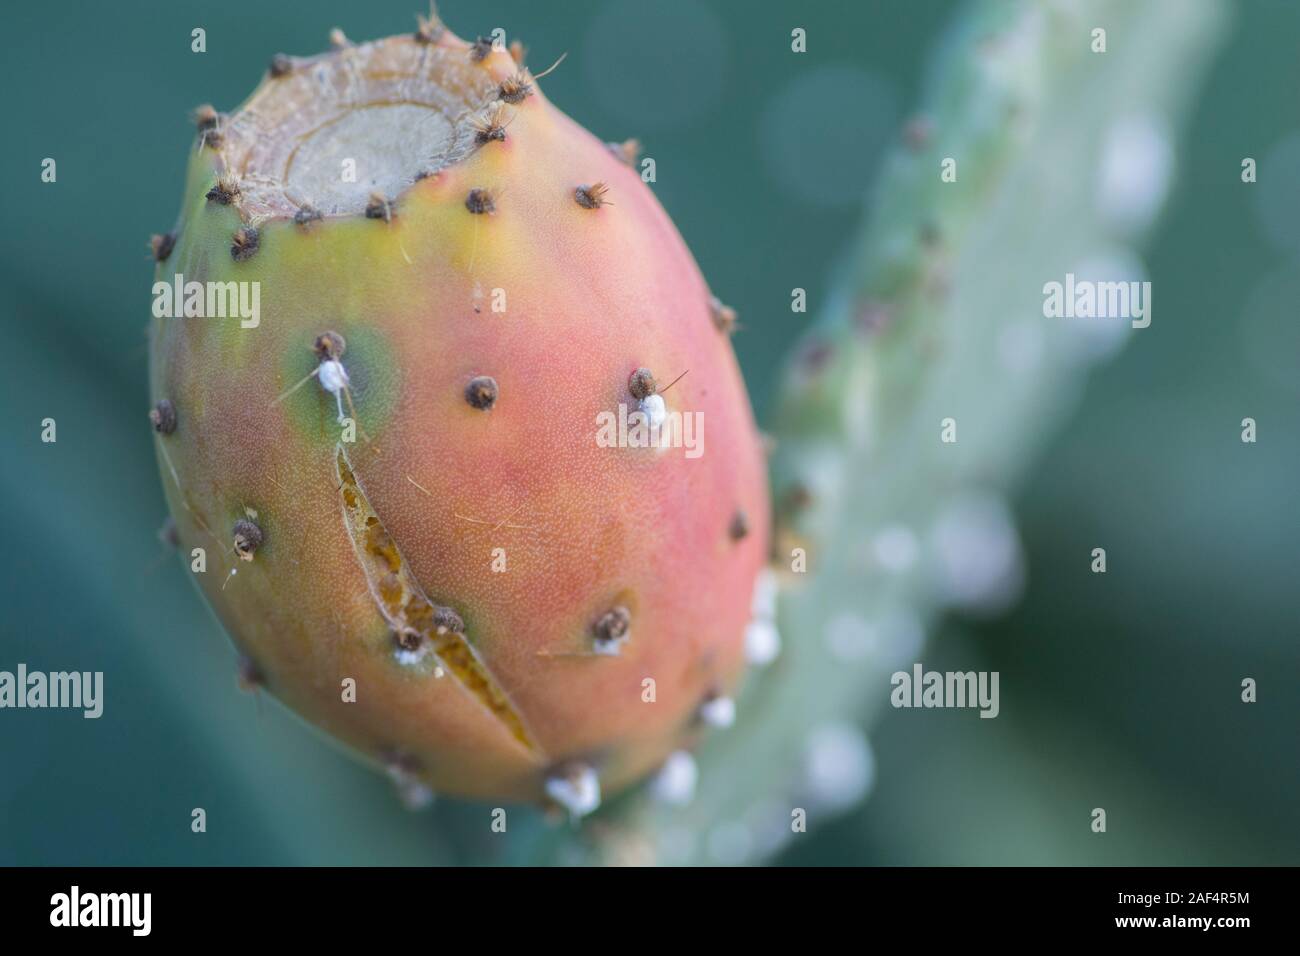 'Dactylopius opuntiae' insects, covering a Prickly pear cactus fruit Stock Photo